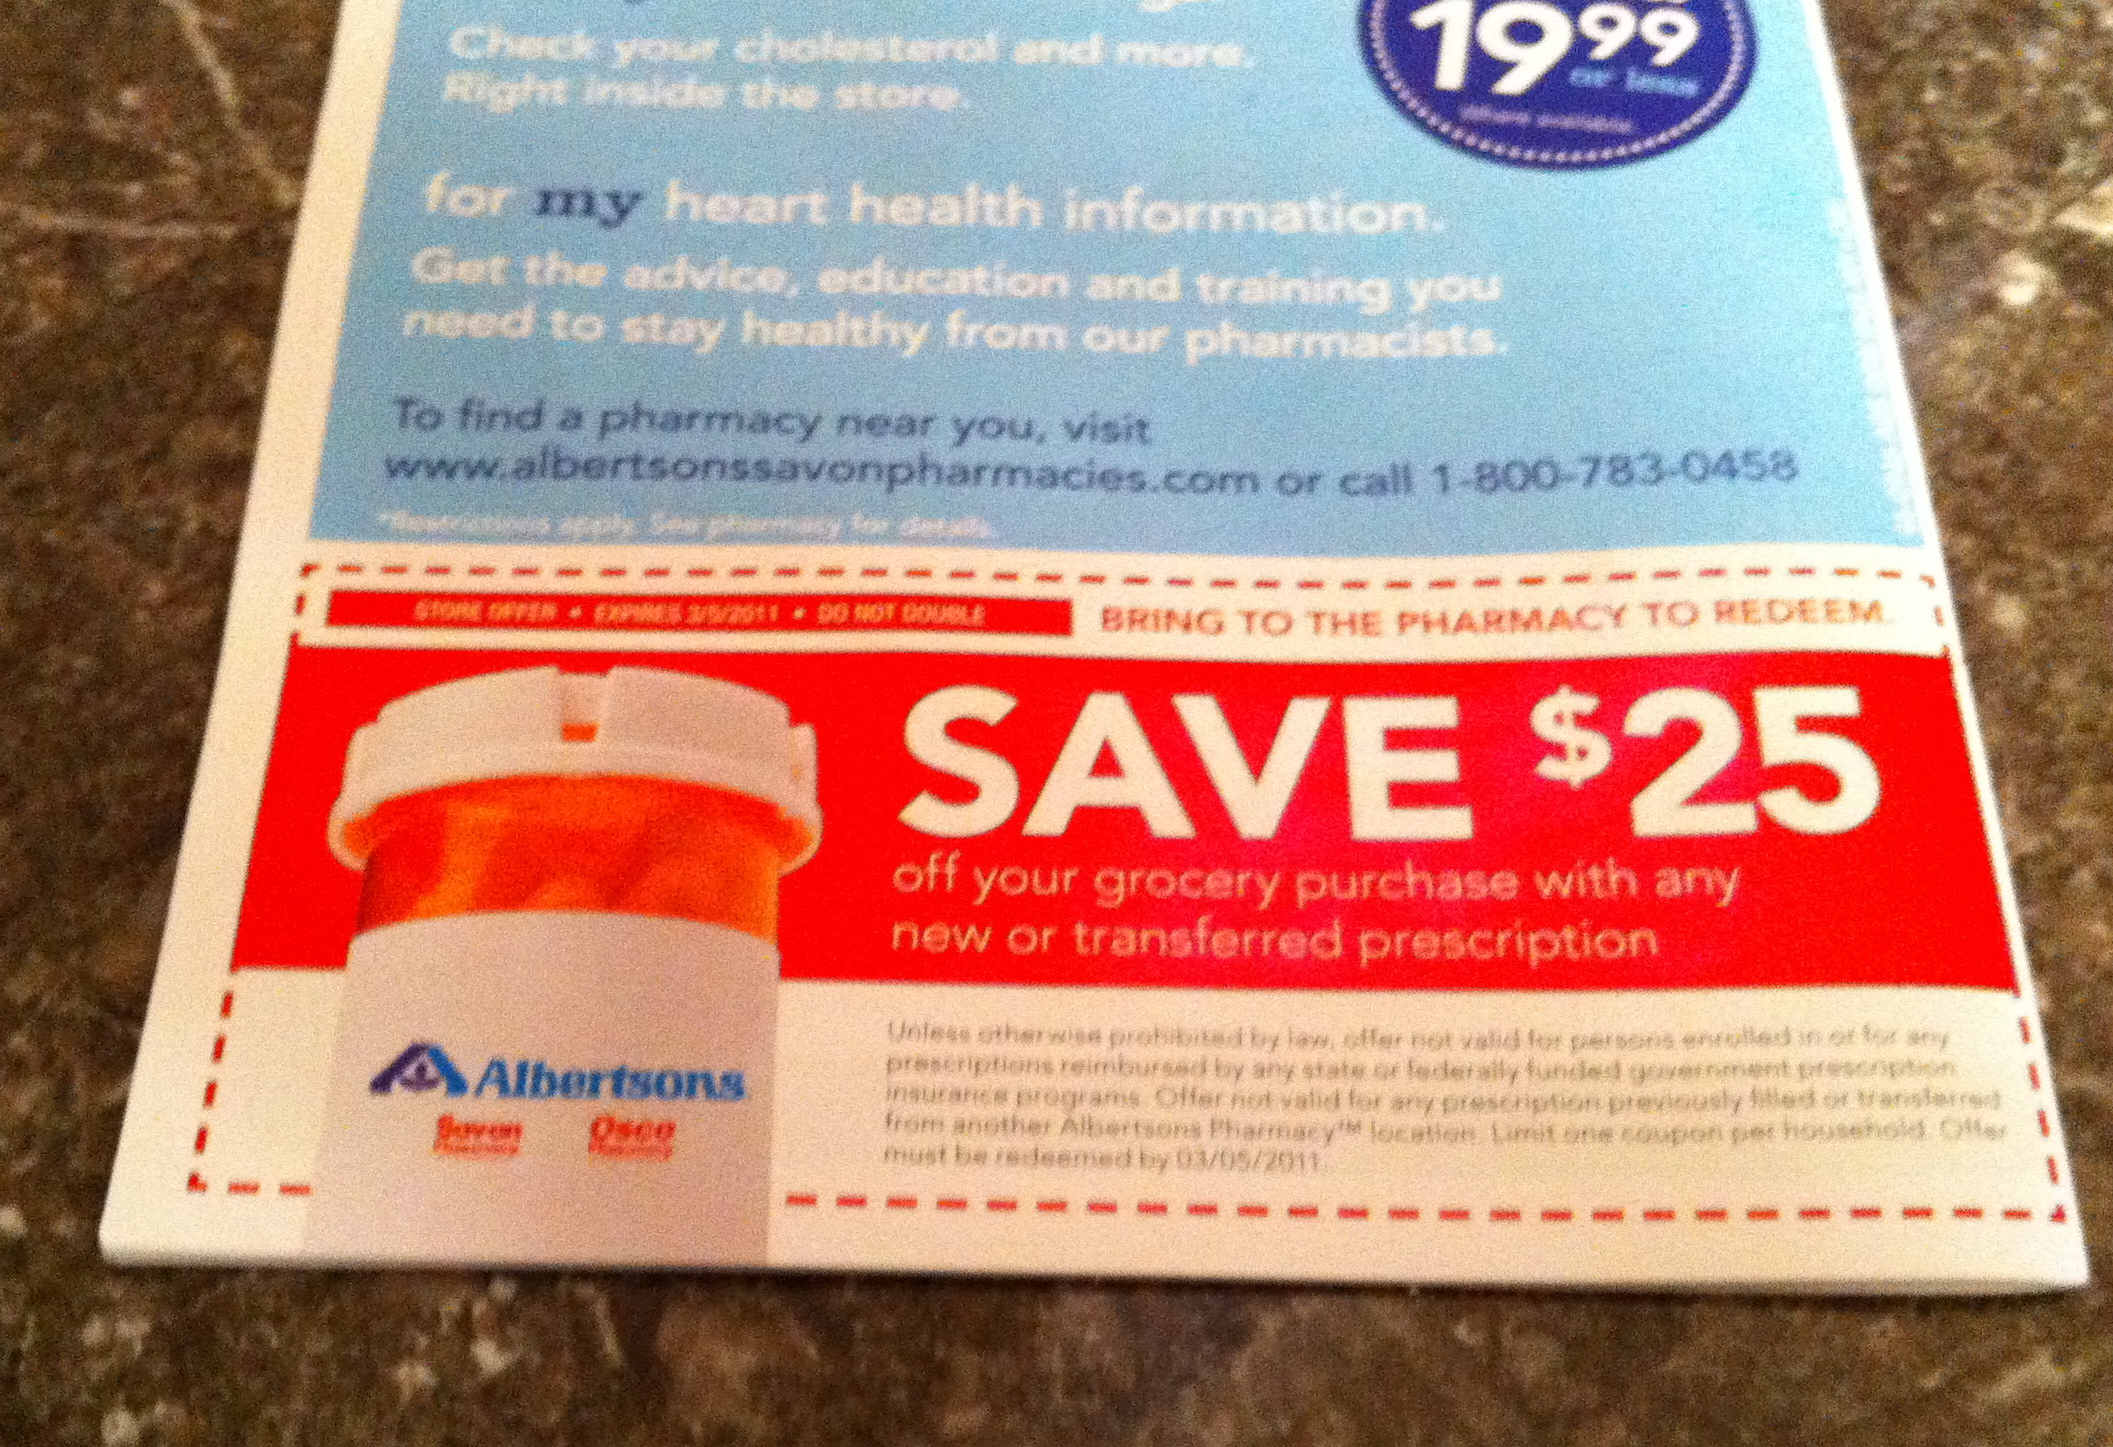 Albertsons: Get a $25 Gift Card with new or transferred Prescription